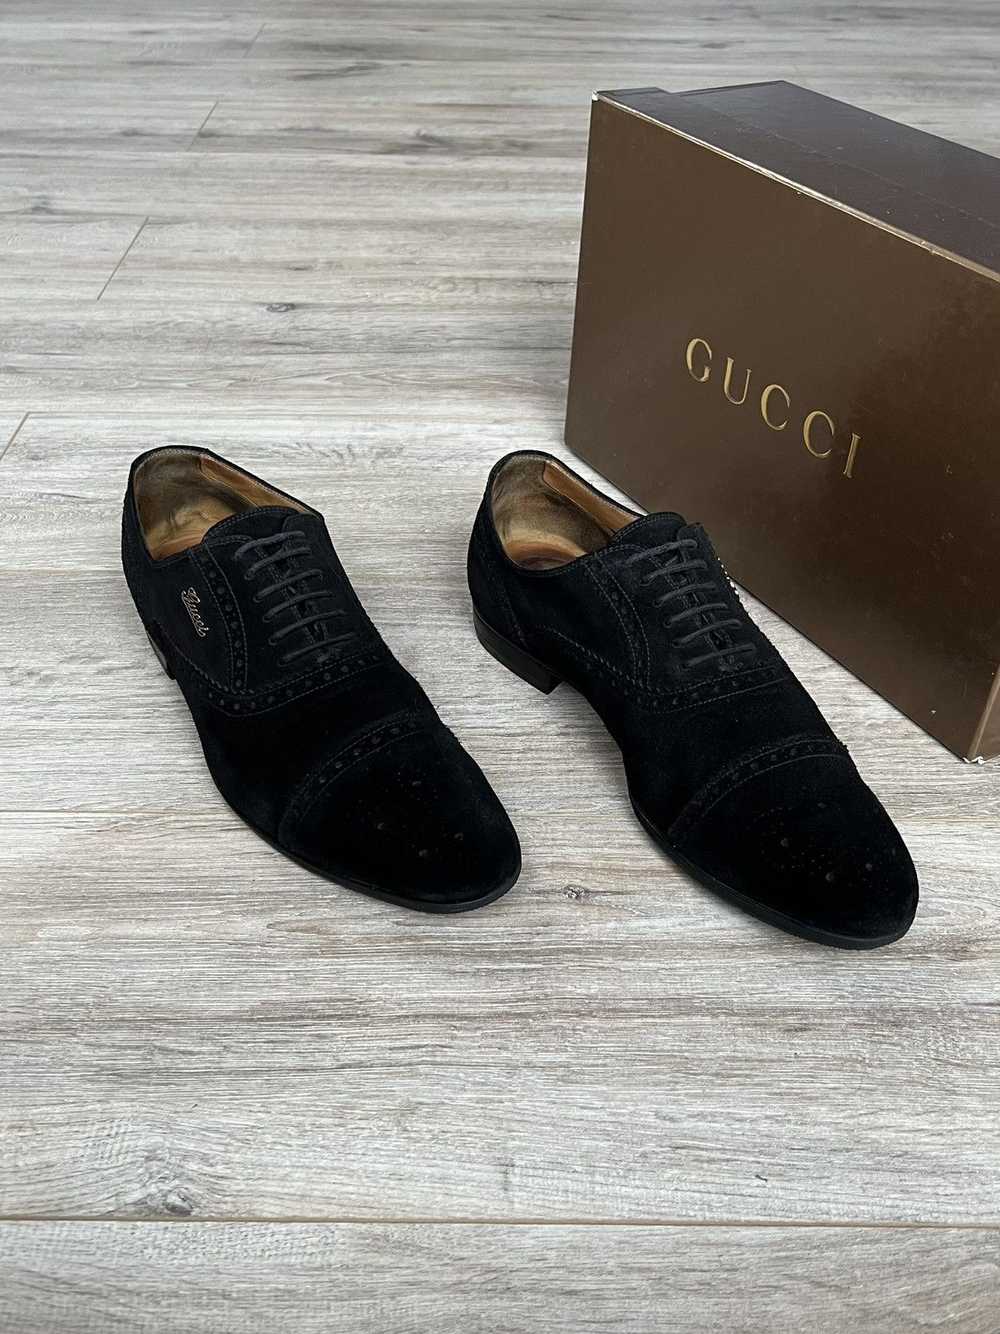 Gucci GUCCI Shoes Oxfords Brogues Suede Lace Up M… - image 1